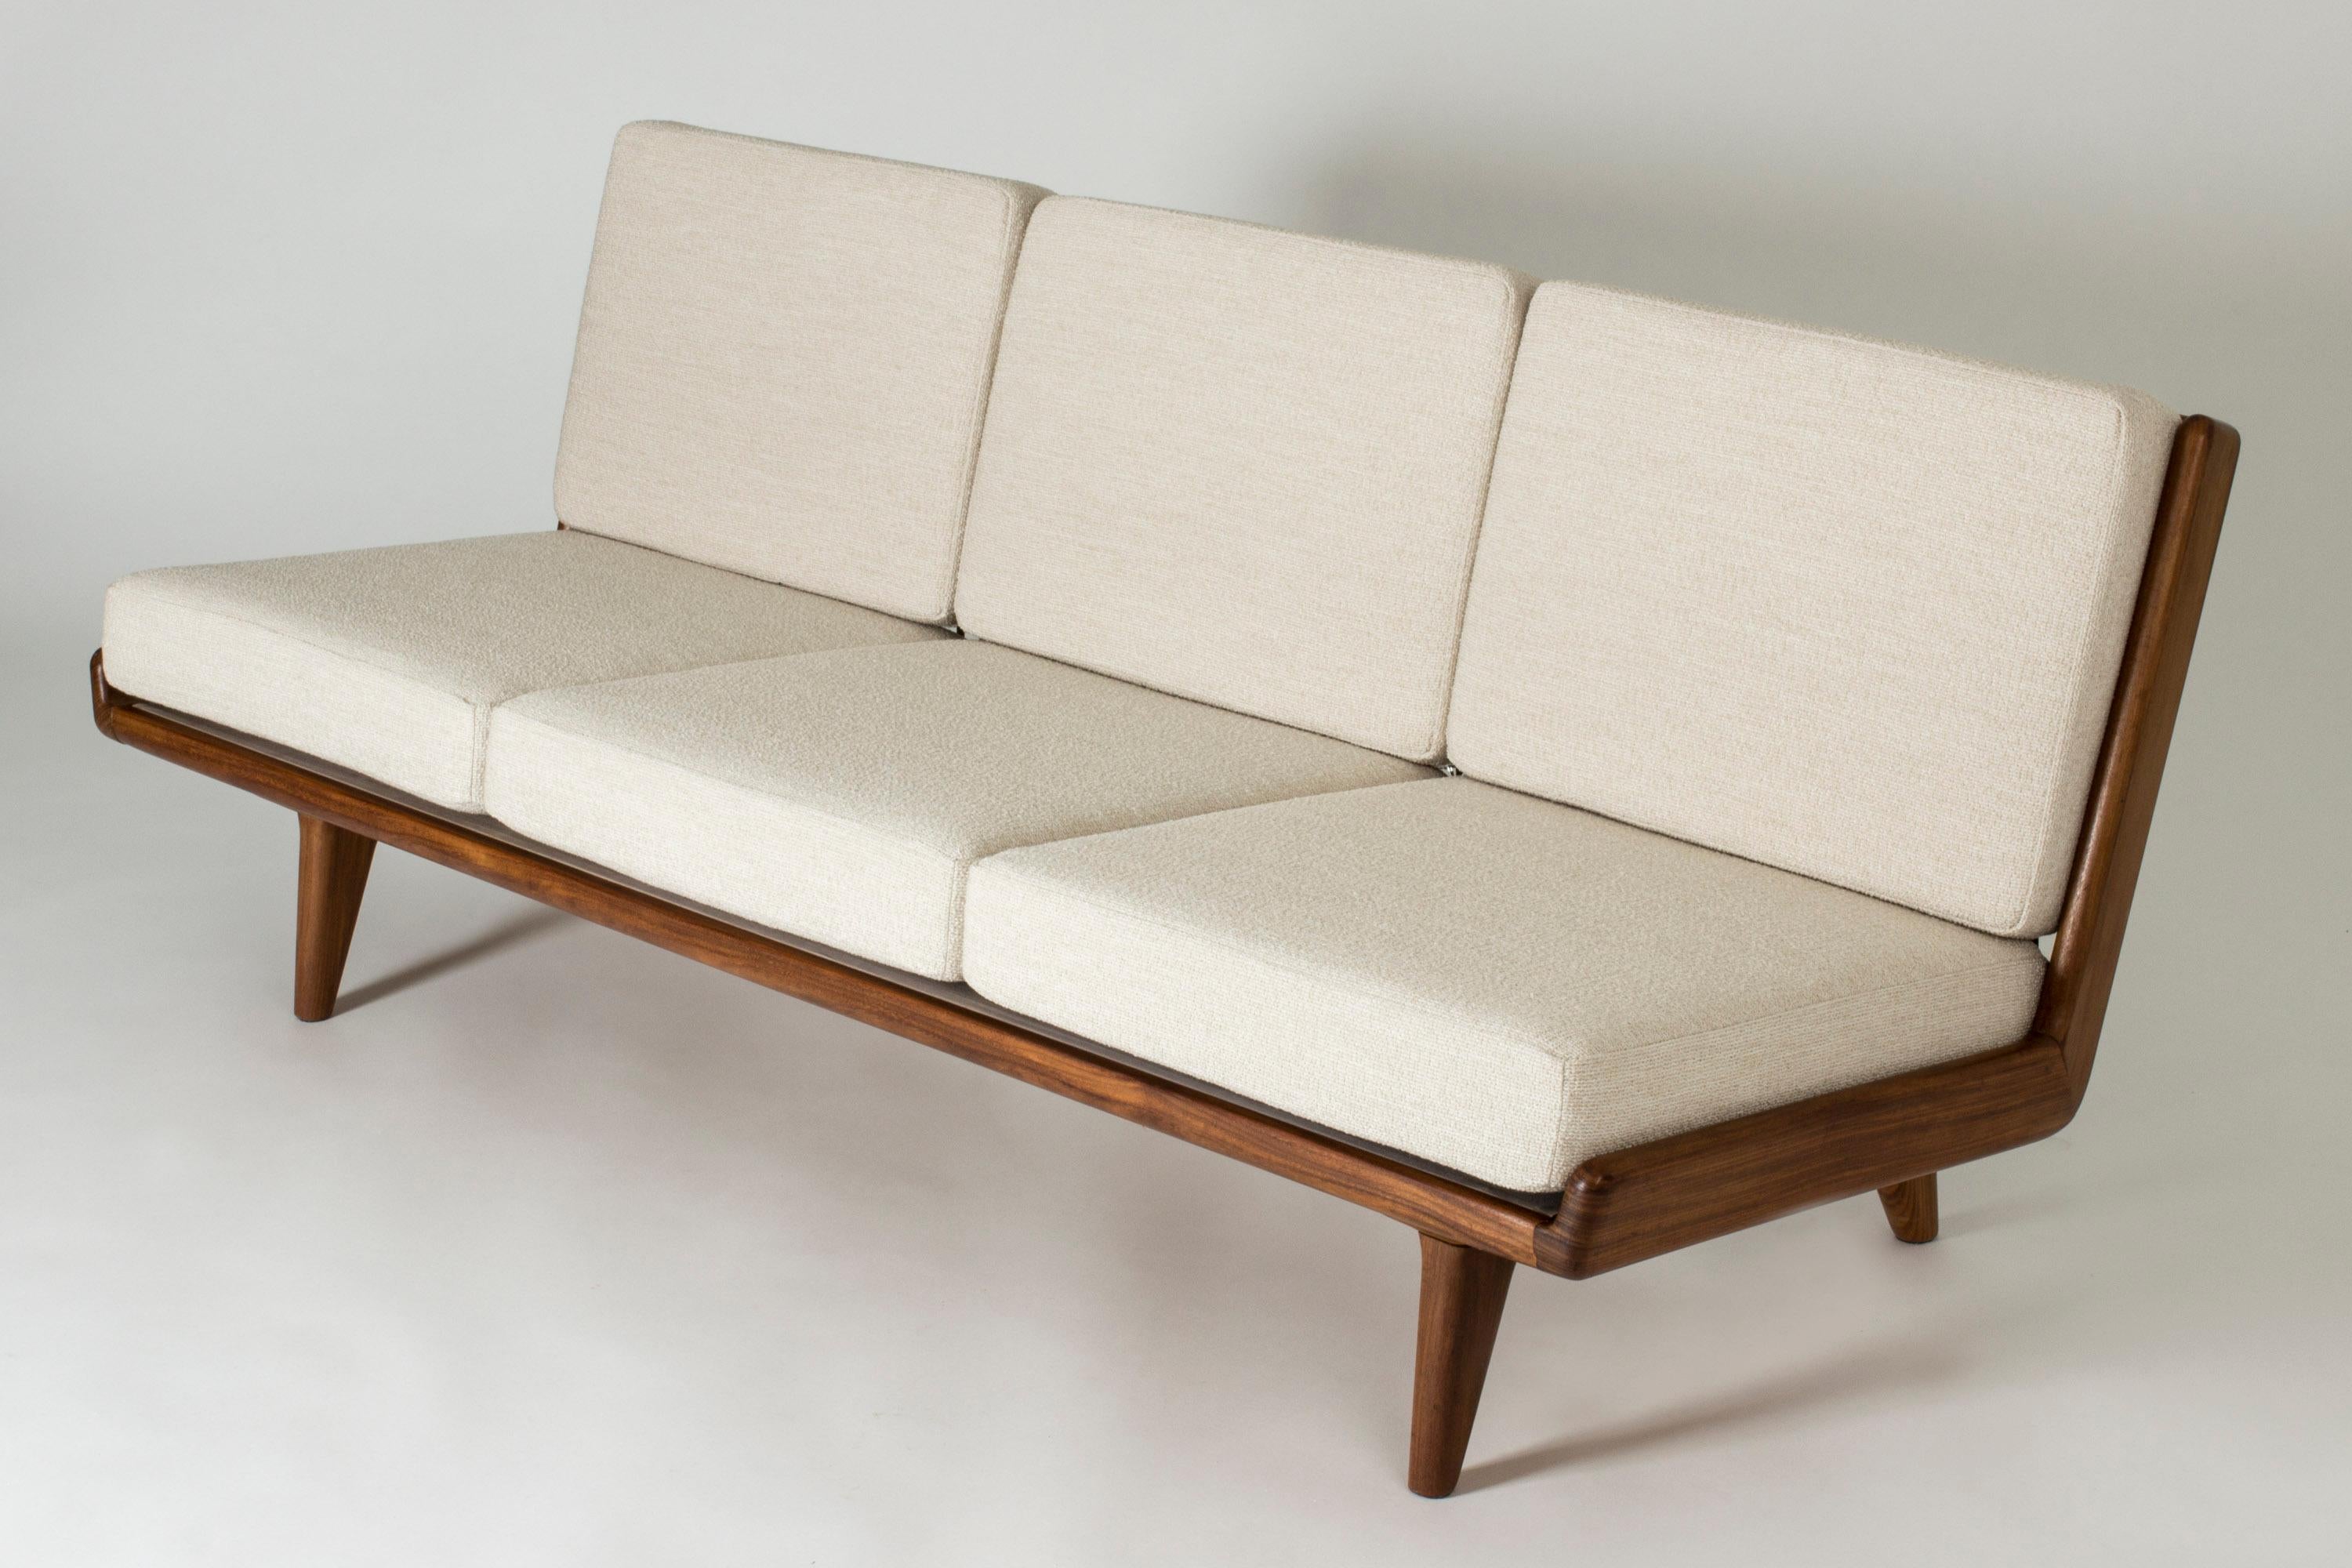 Walnut Sofa with Leather Webbing by Gustaf Hiort Af Ornäs, Finland, 1950s For Sale 1